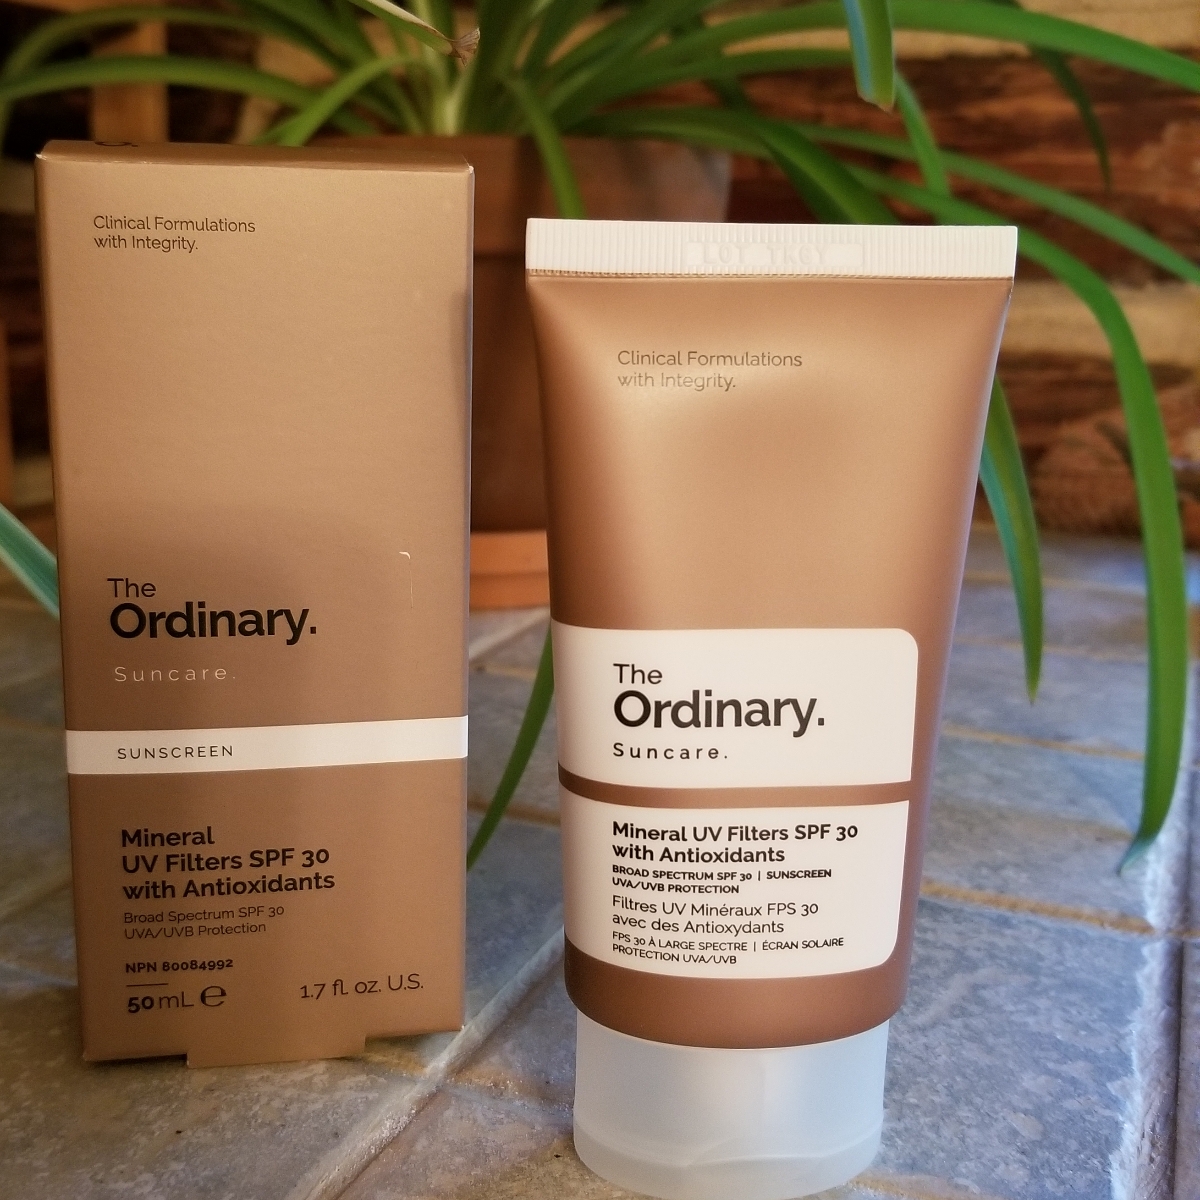 The Ordinary Mineral UV Filters SPF 30 with Antioxidants Reviews | abillion